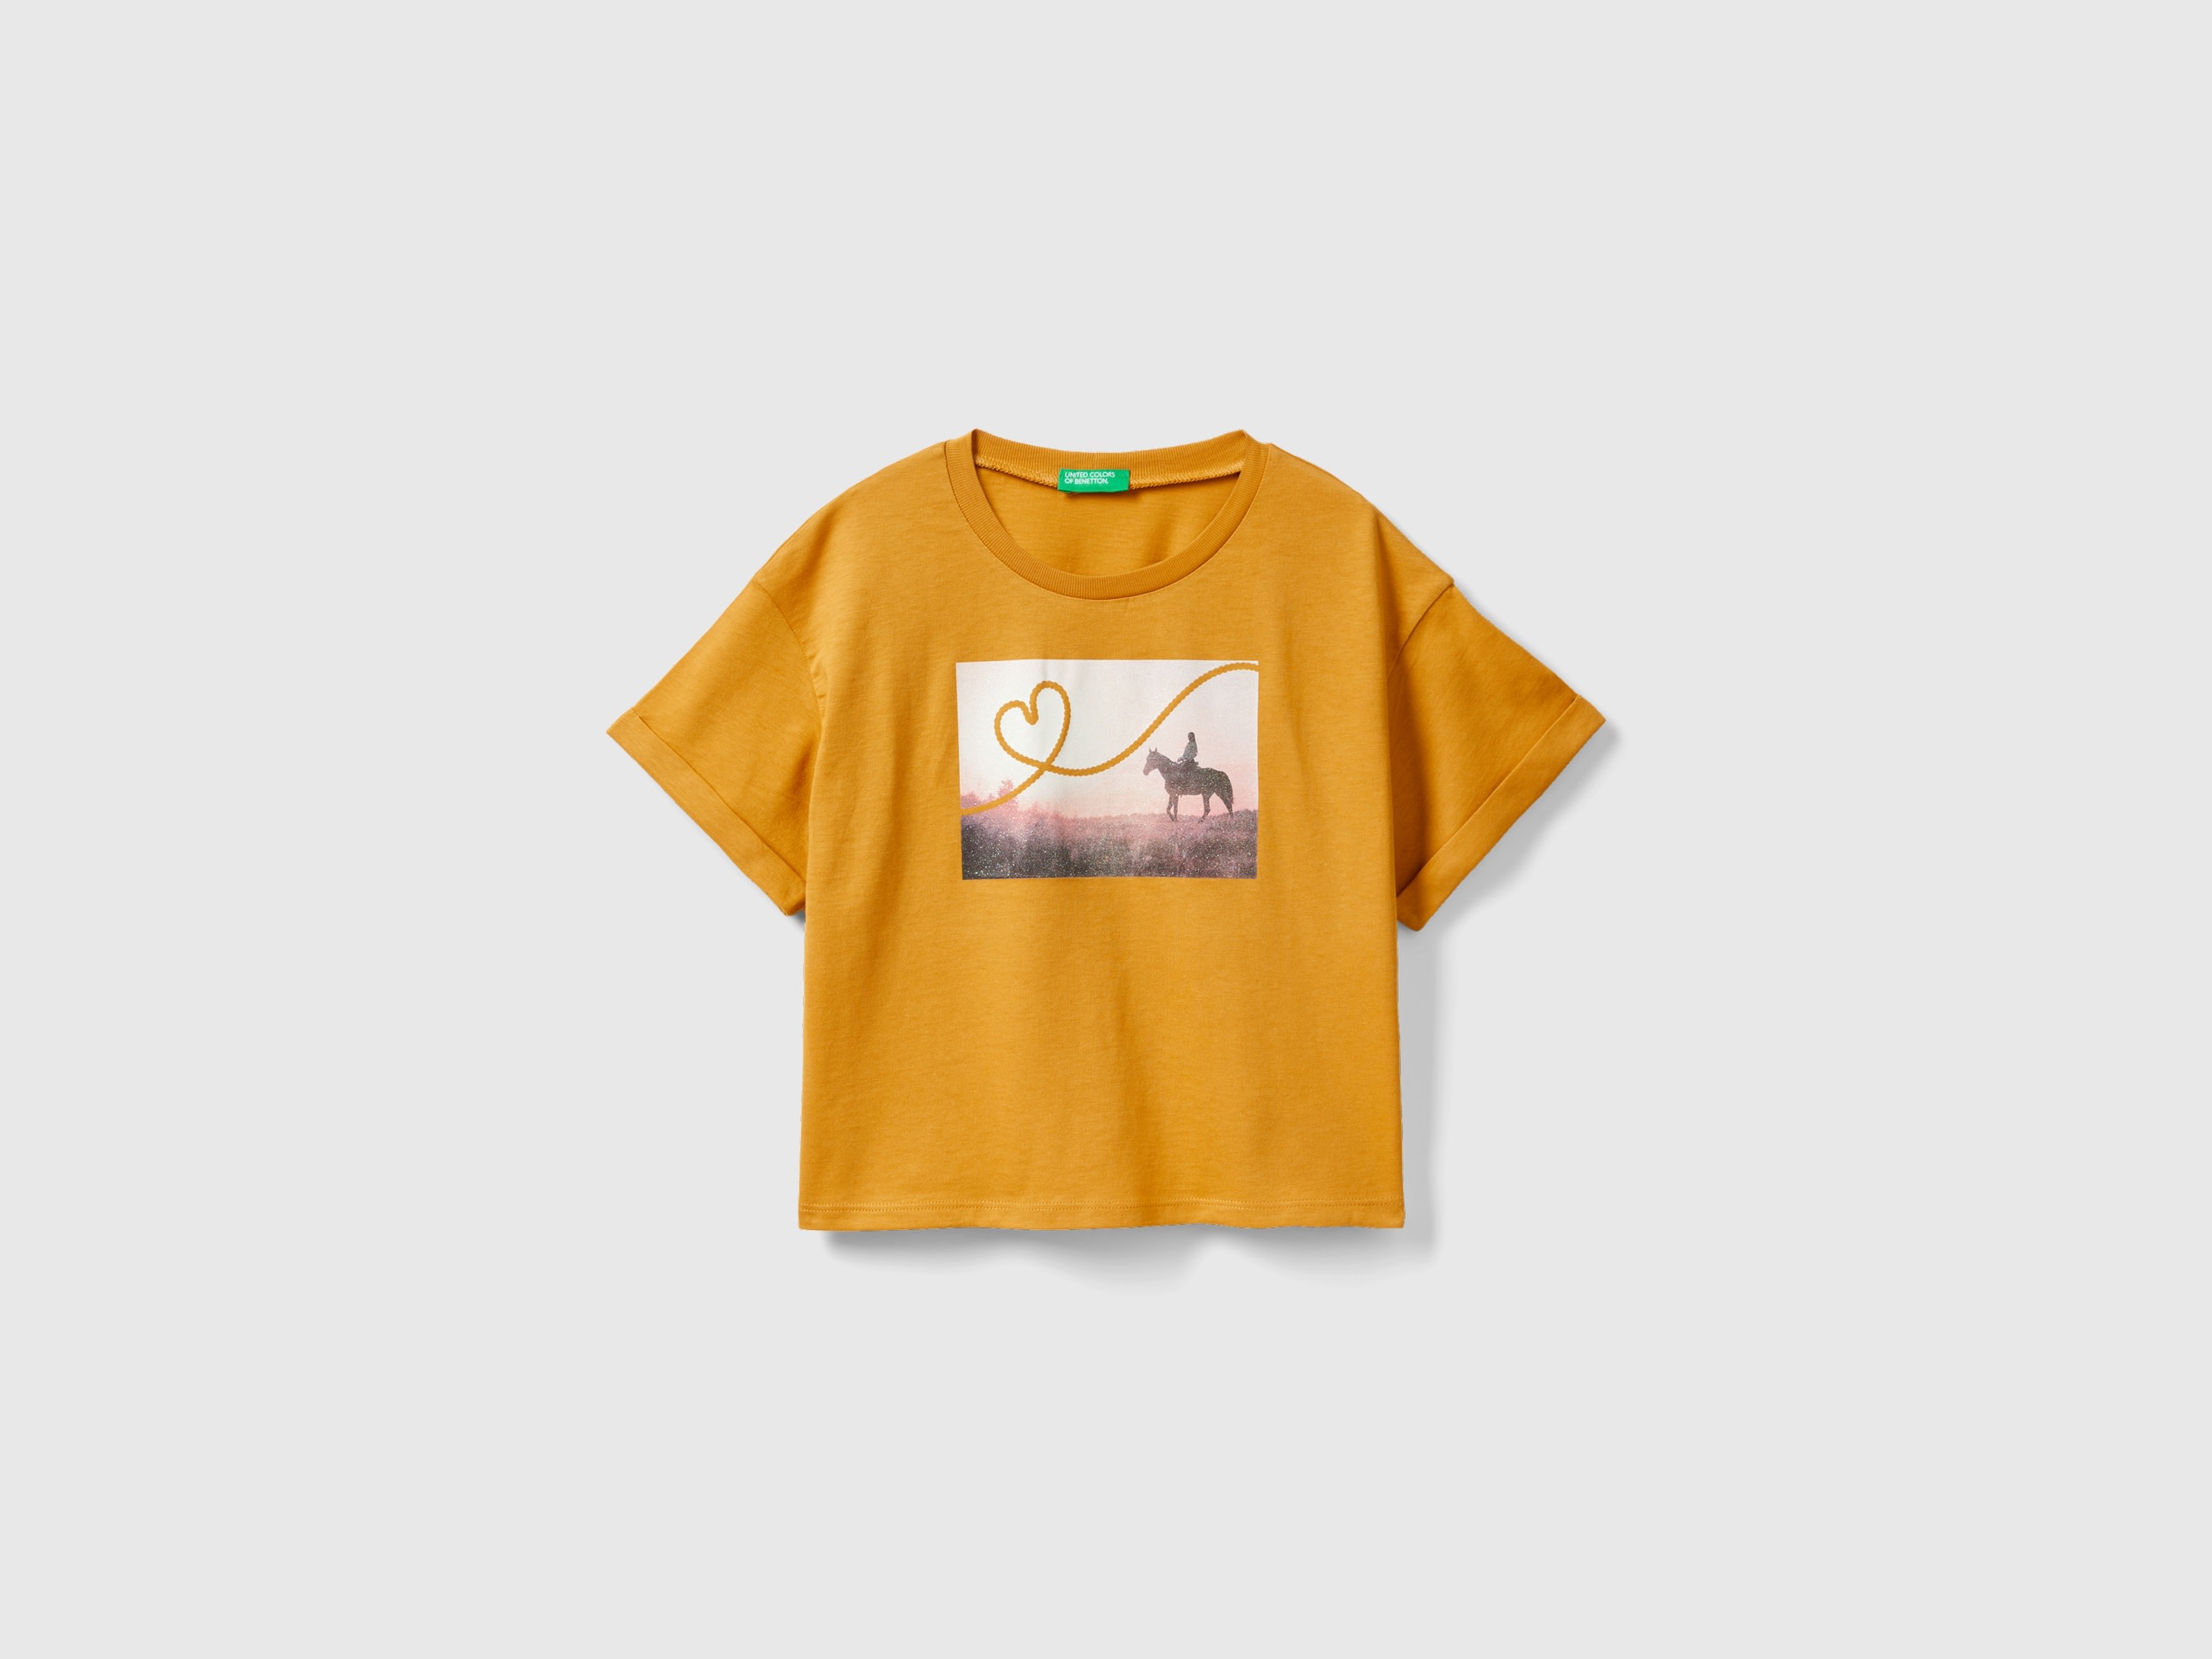 Image of Benetton, T-shirt With Photographic Horse Print, size 3XL, Mustard, Kids